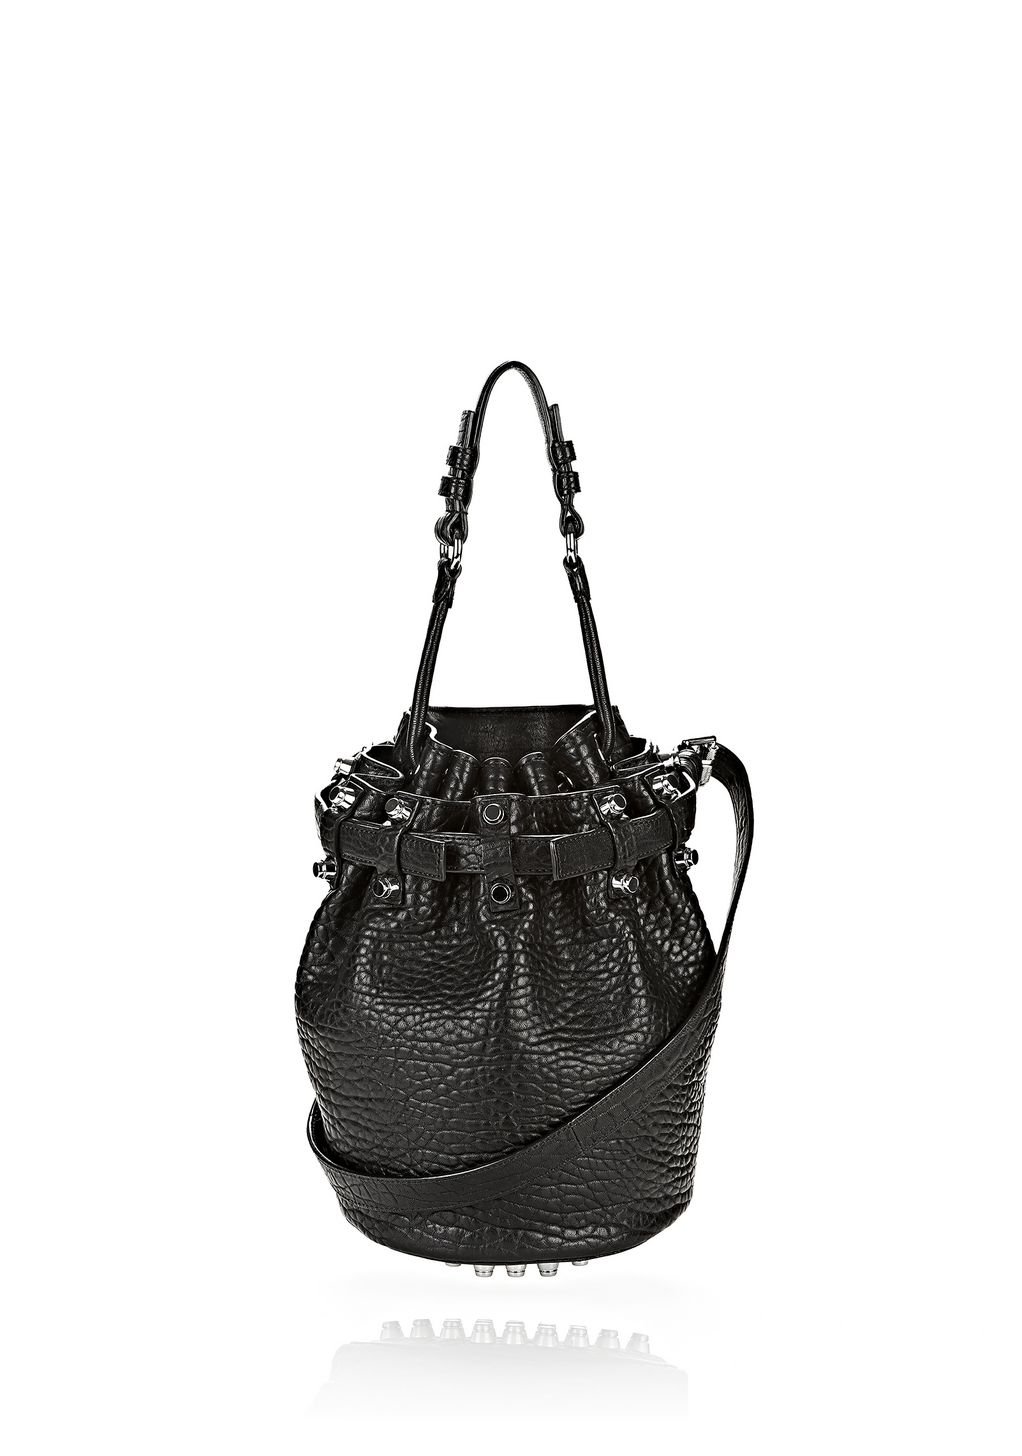 Alexander Wang ‎SMALL DIEGO IN PEBBLED BLACK WITH RHODIUM ‎ ‎Shoulder ...